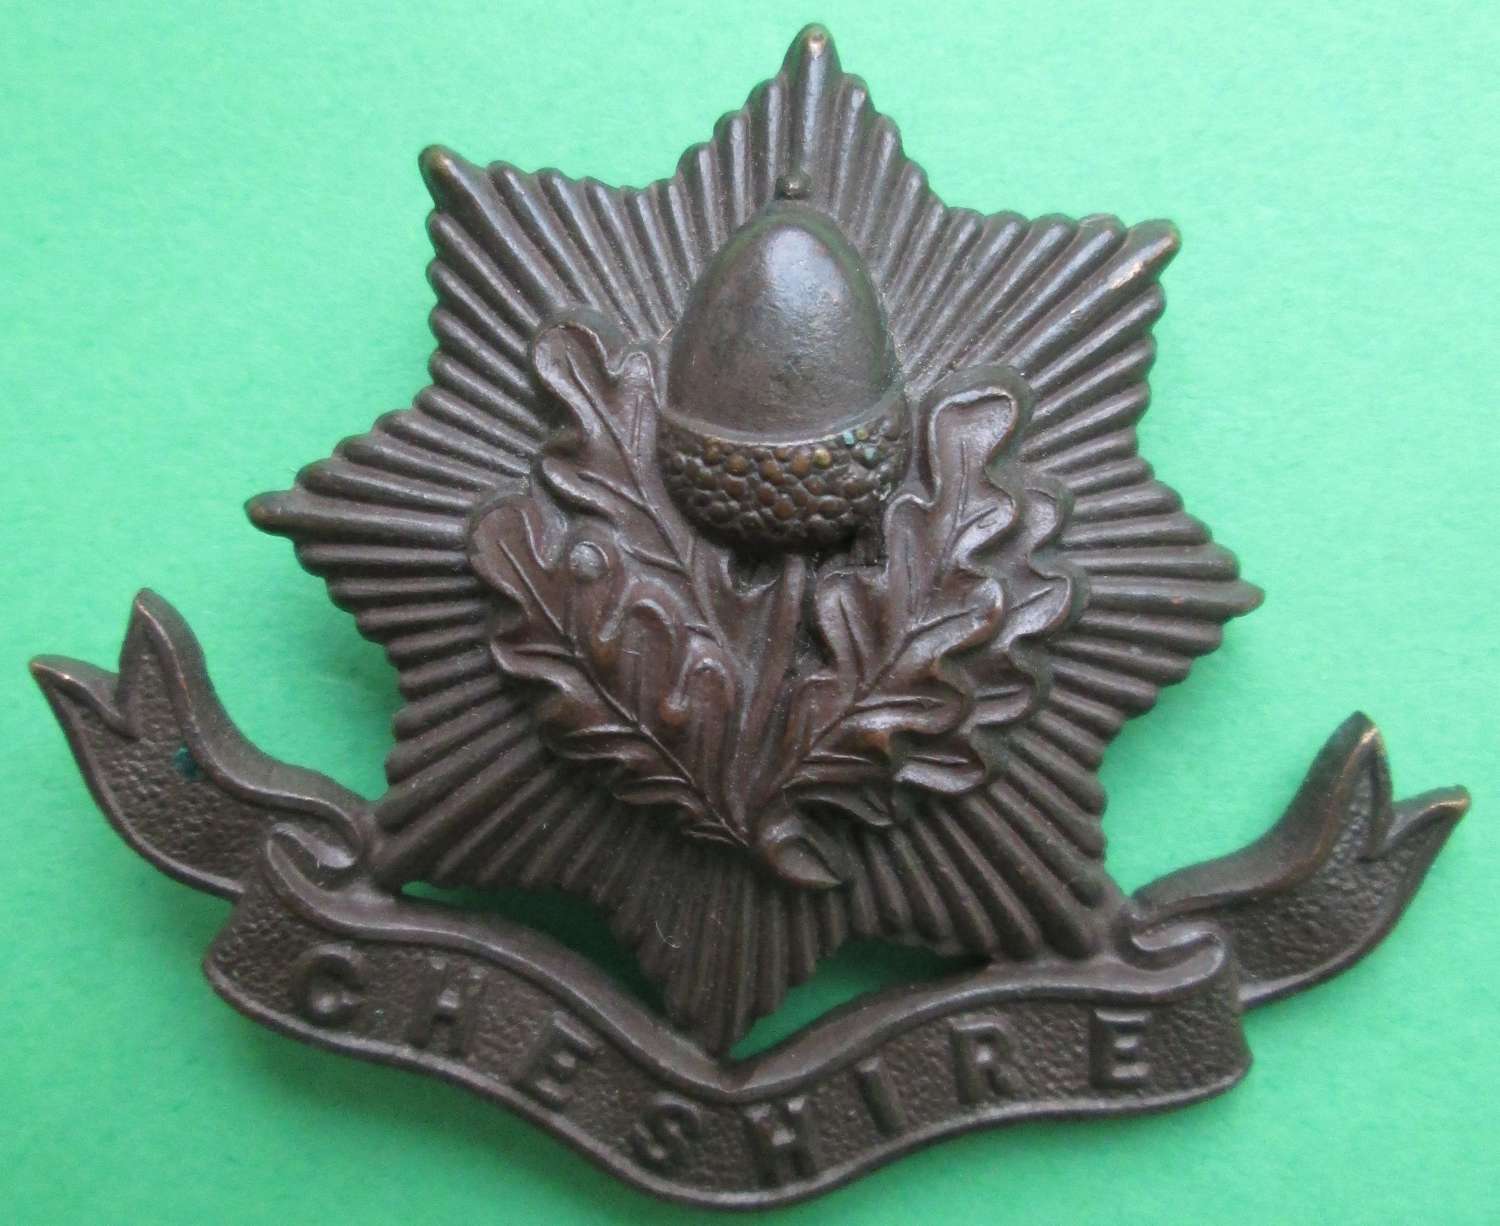 A CHESHIRE REGIMENT OFFICERS BRONZE BADGE